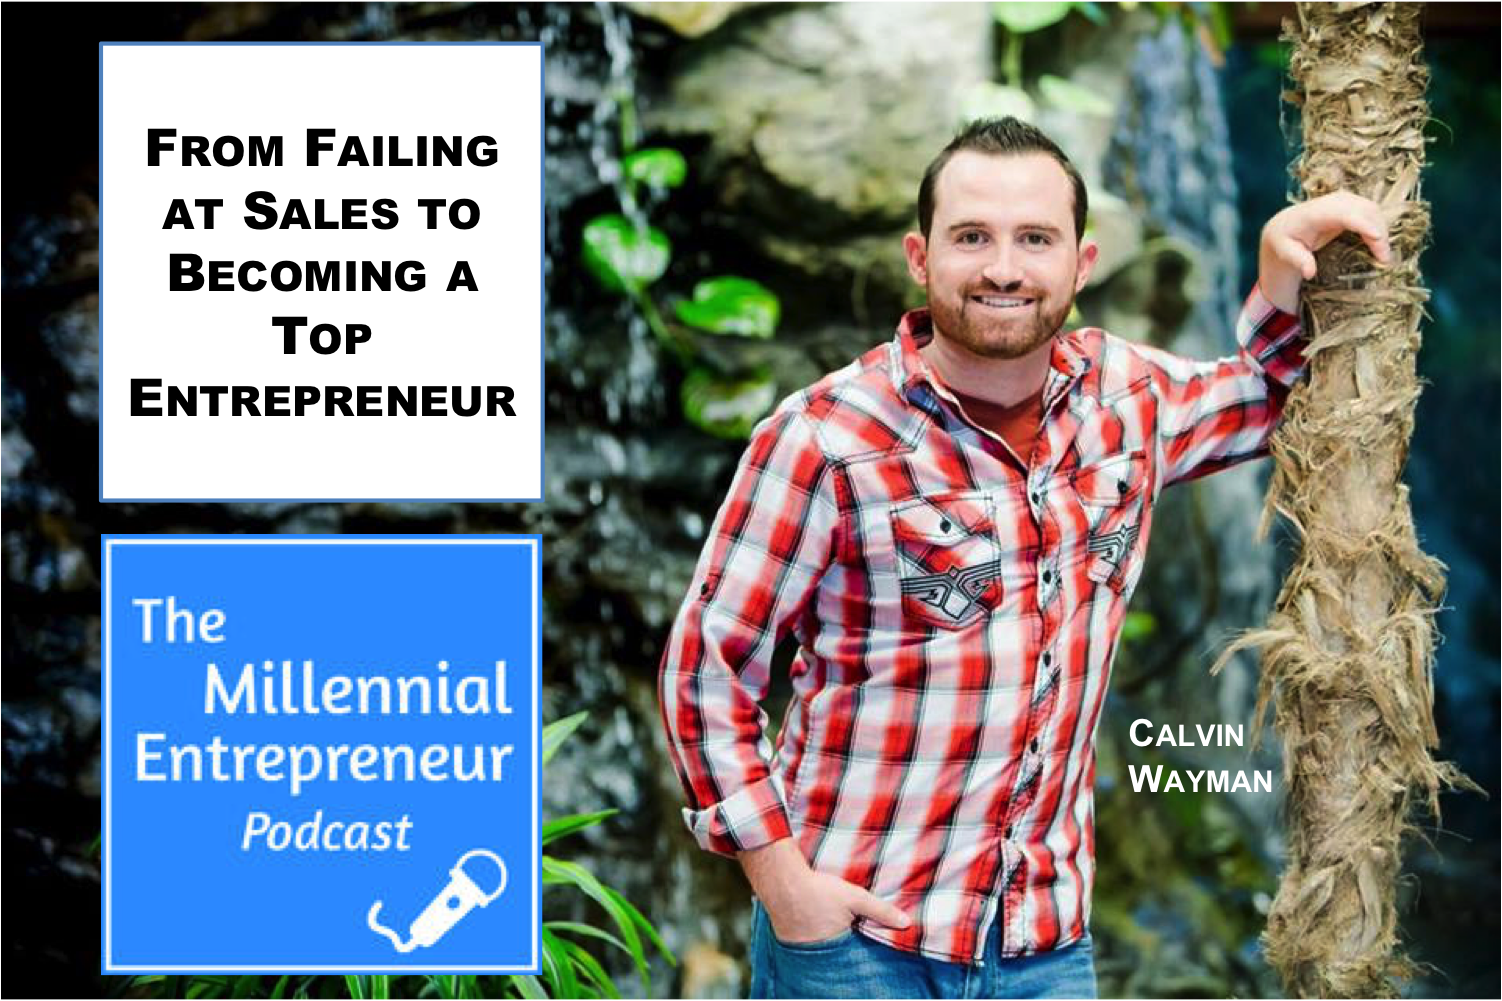 From Failing at Sales to Top Entrepreneur